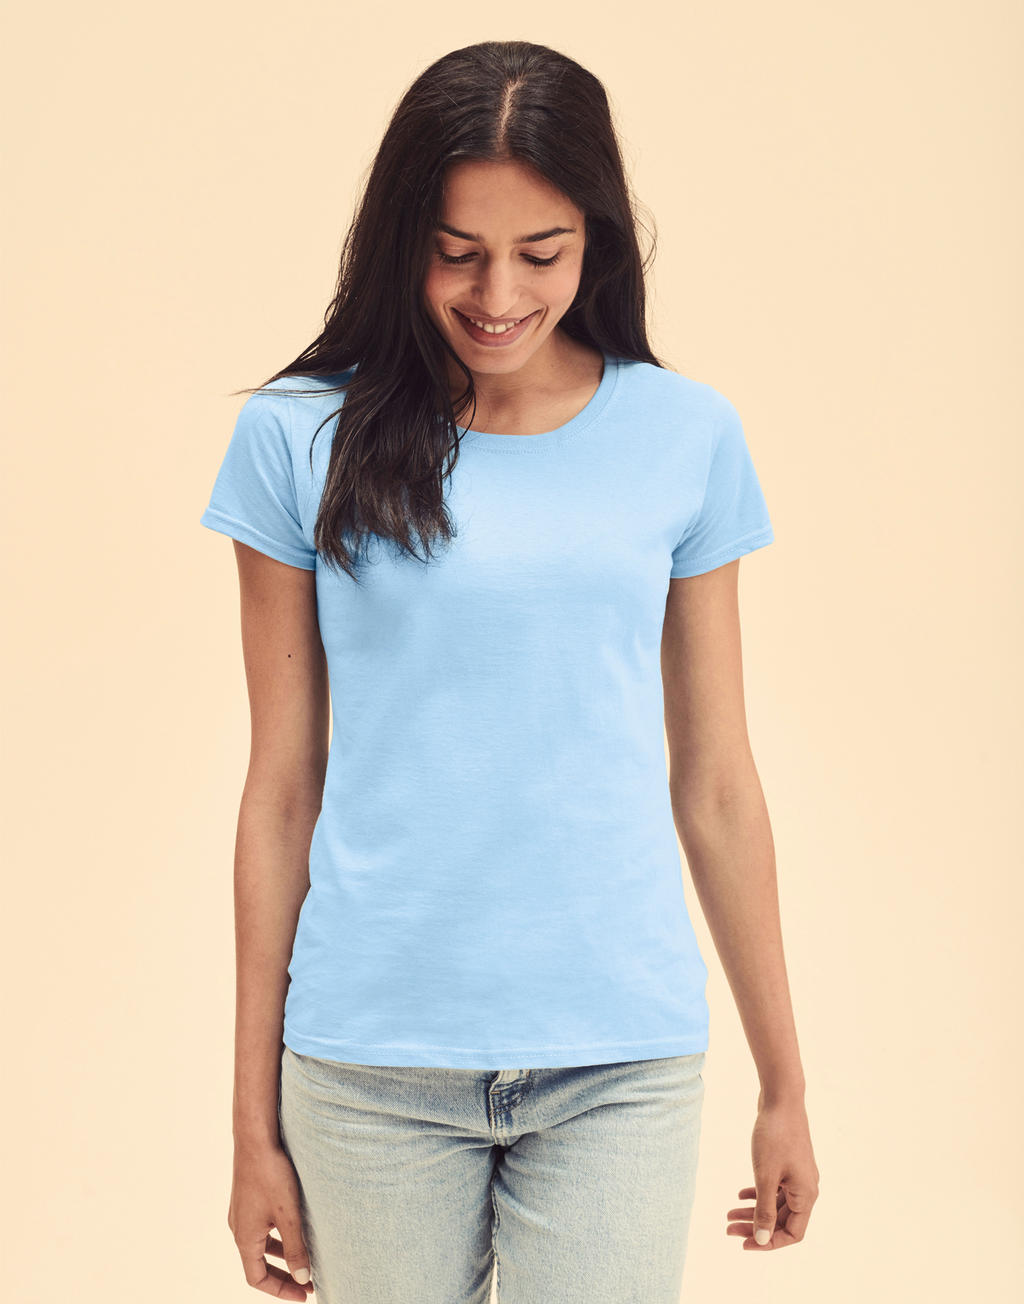  Ladies Valueweight T in Farbe White